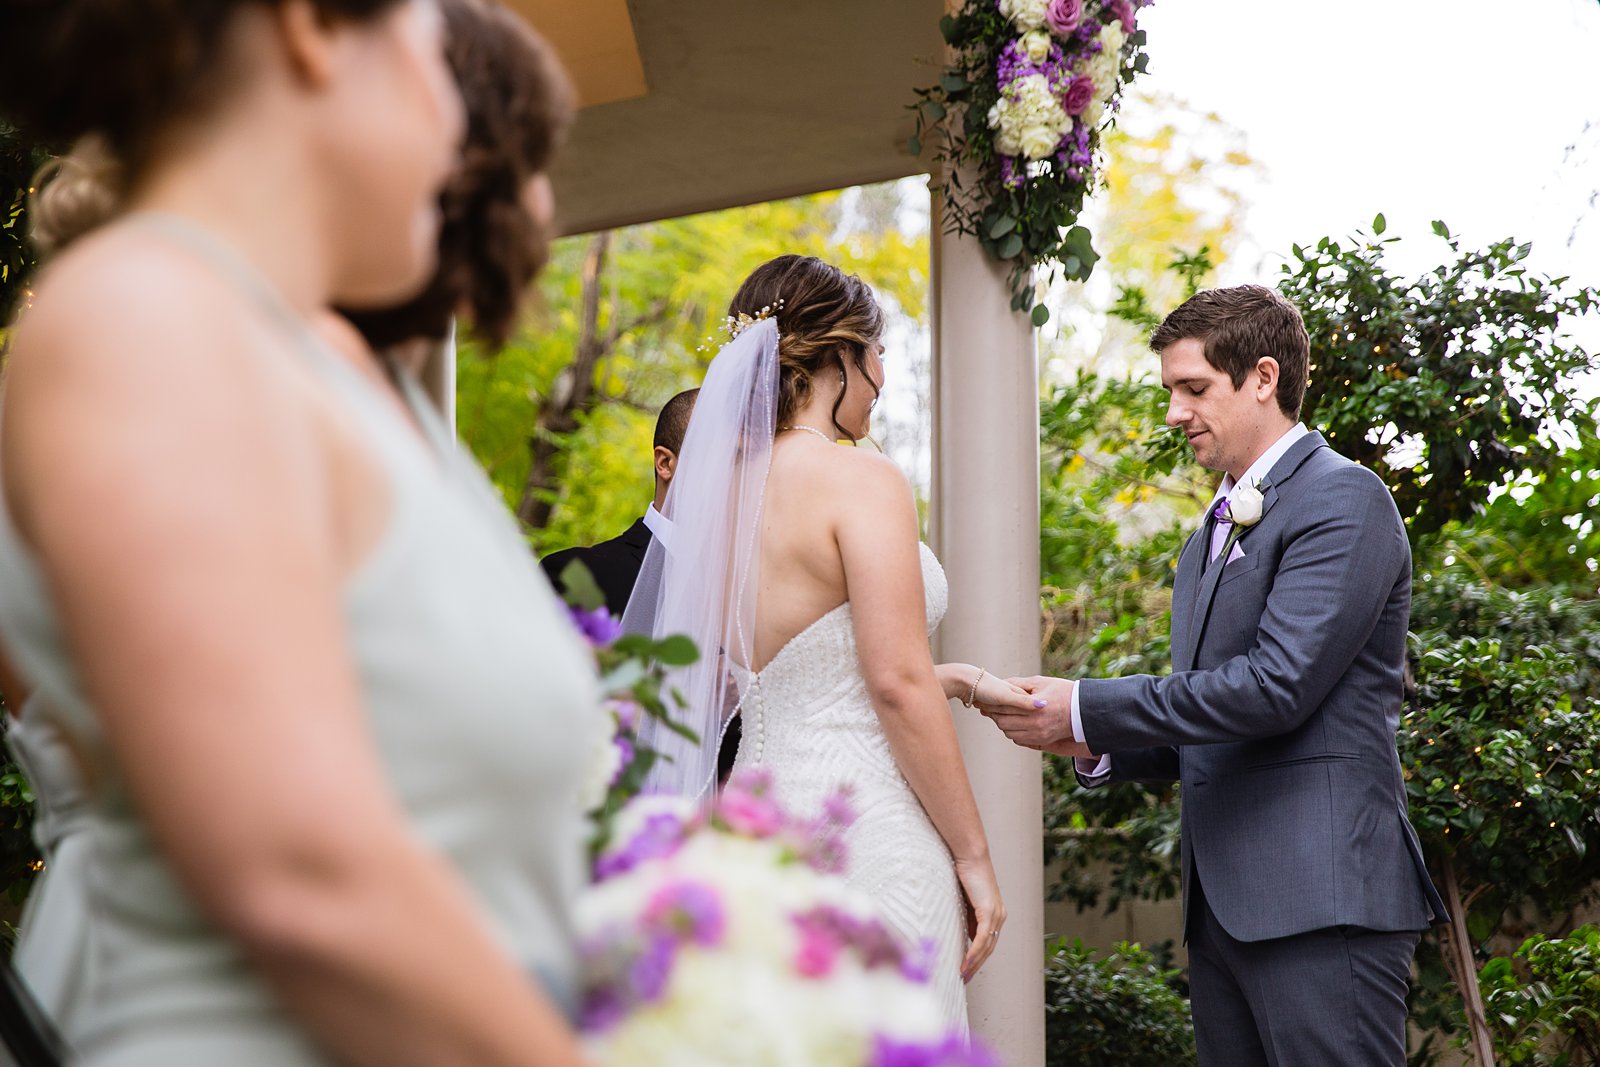 Bride and Groom exchange rings during their wedding ceremony at The Wright House by Arizona wedding photographer PMA Photography.